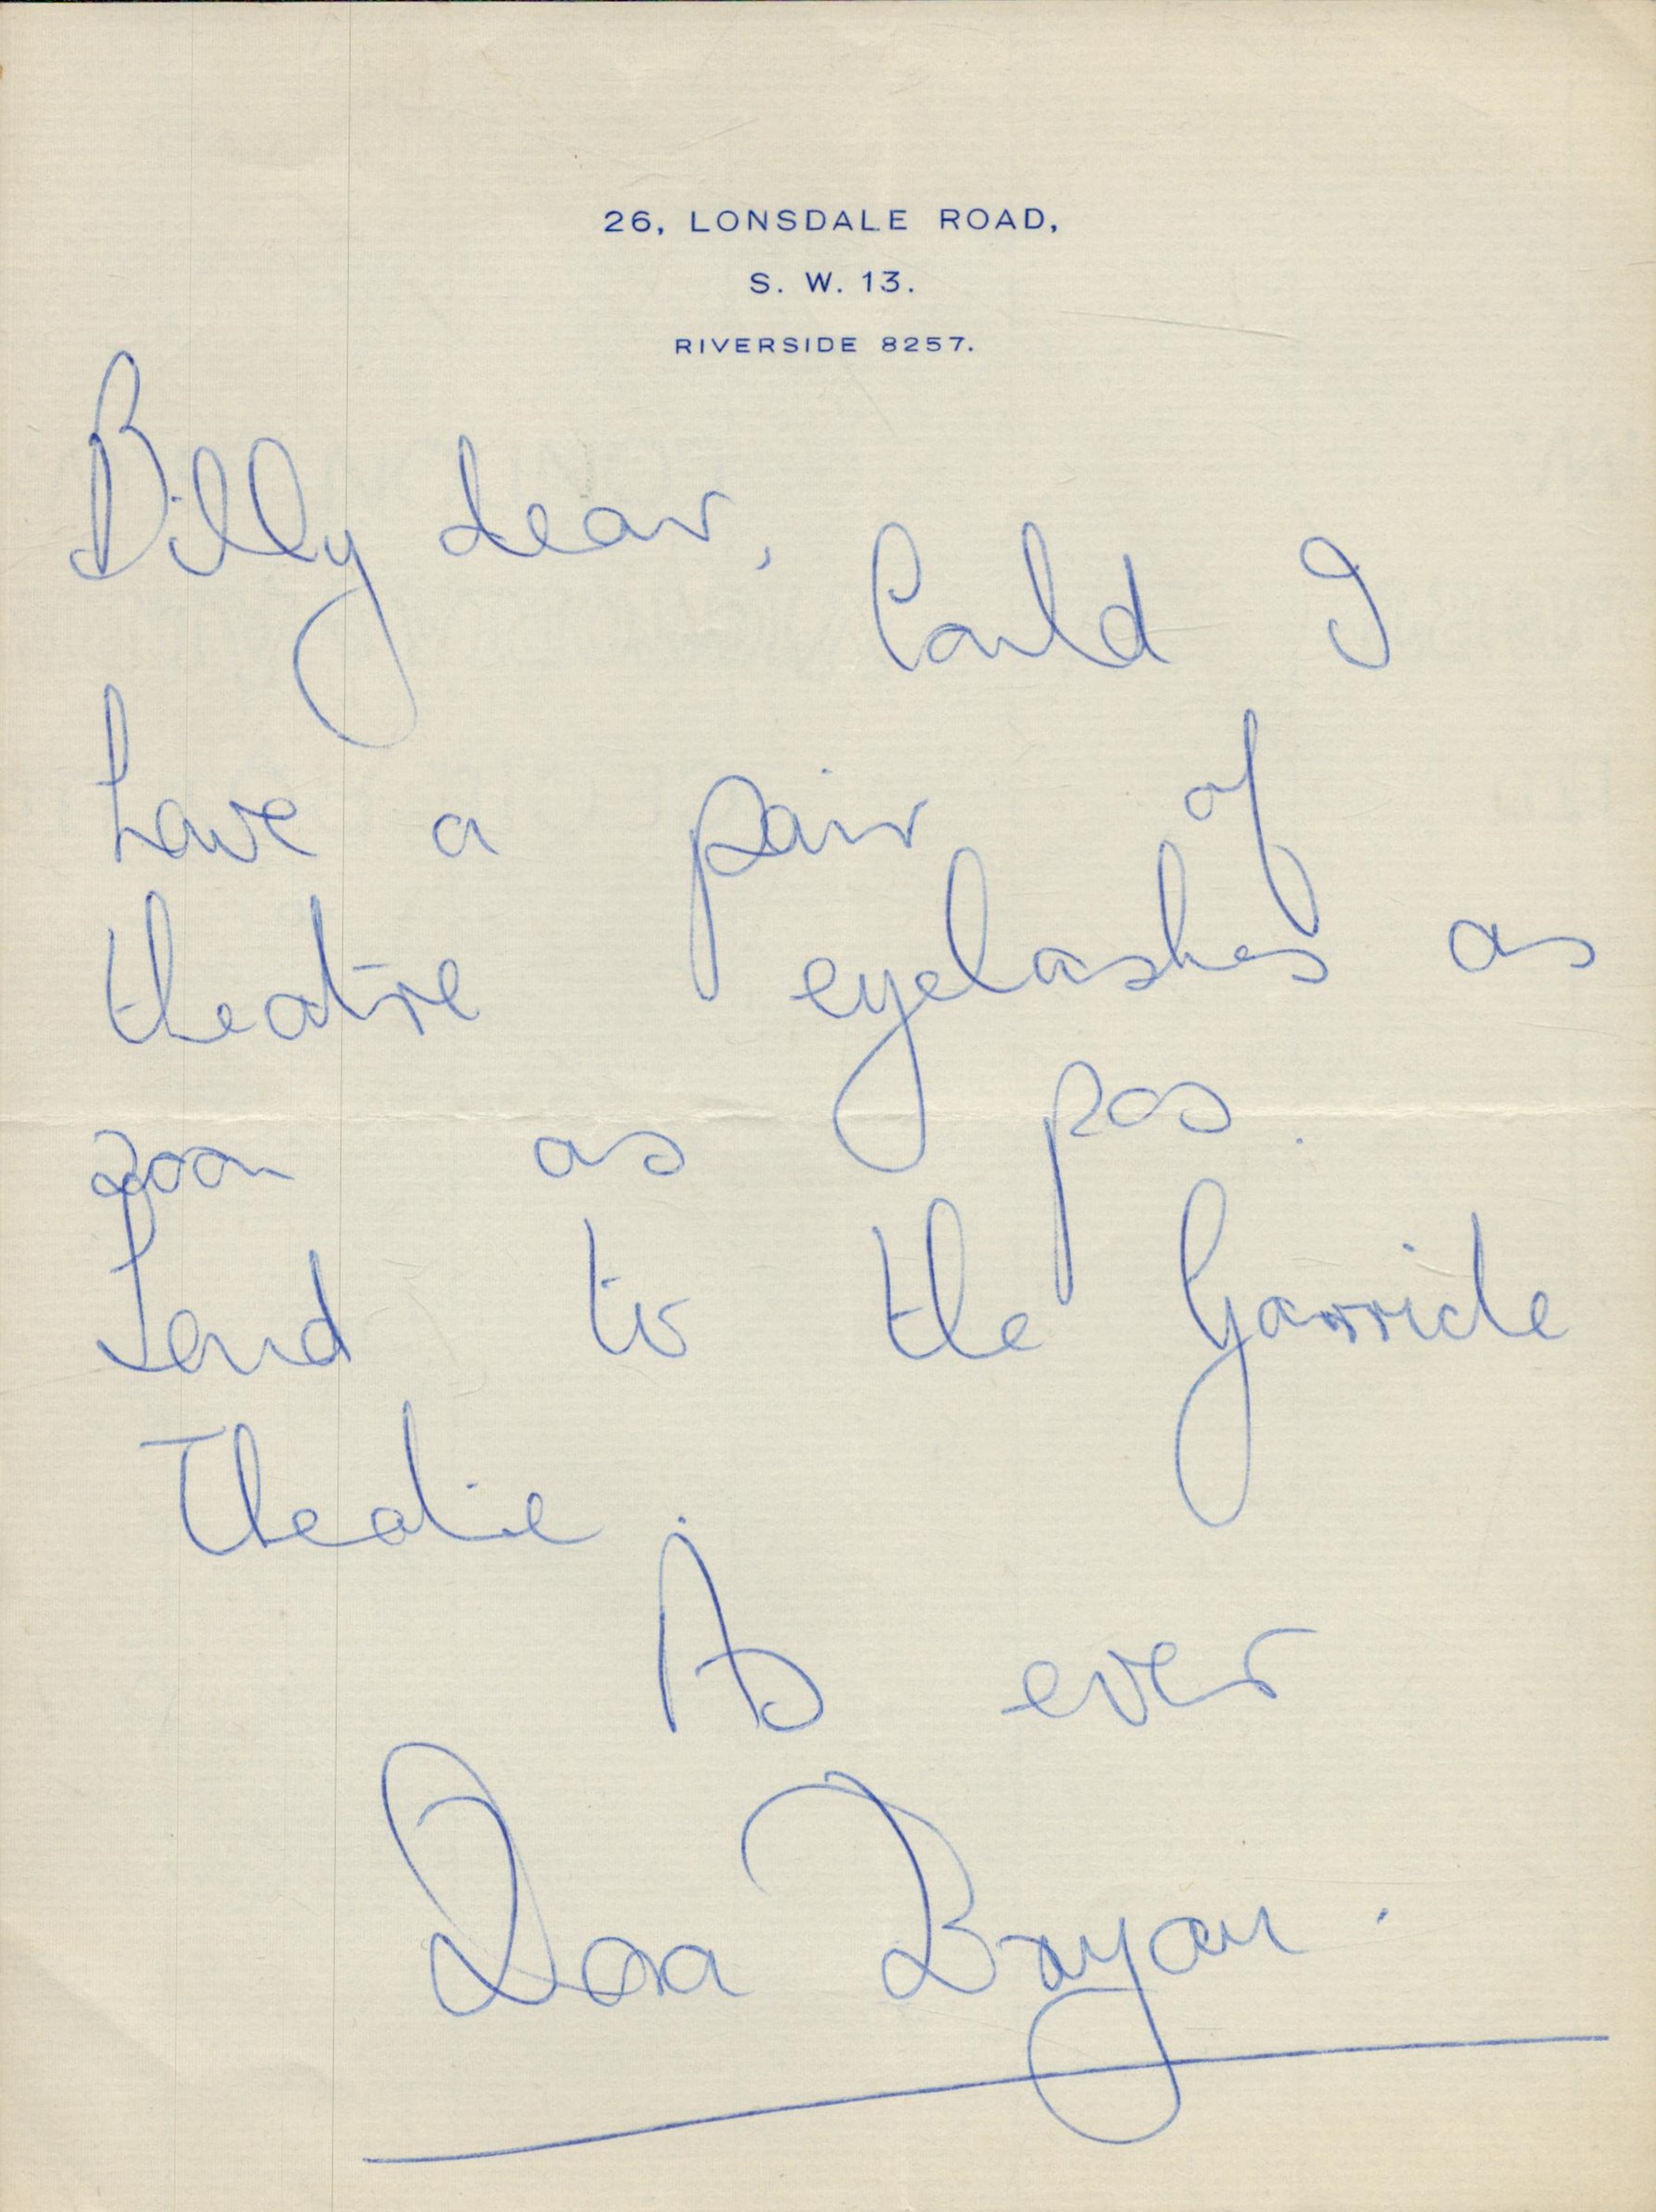 Dora Bryan - vintage undated ALS from her home address asking for a pair of theatre eyelashes